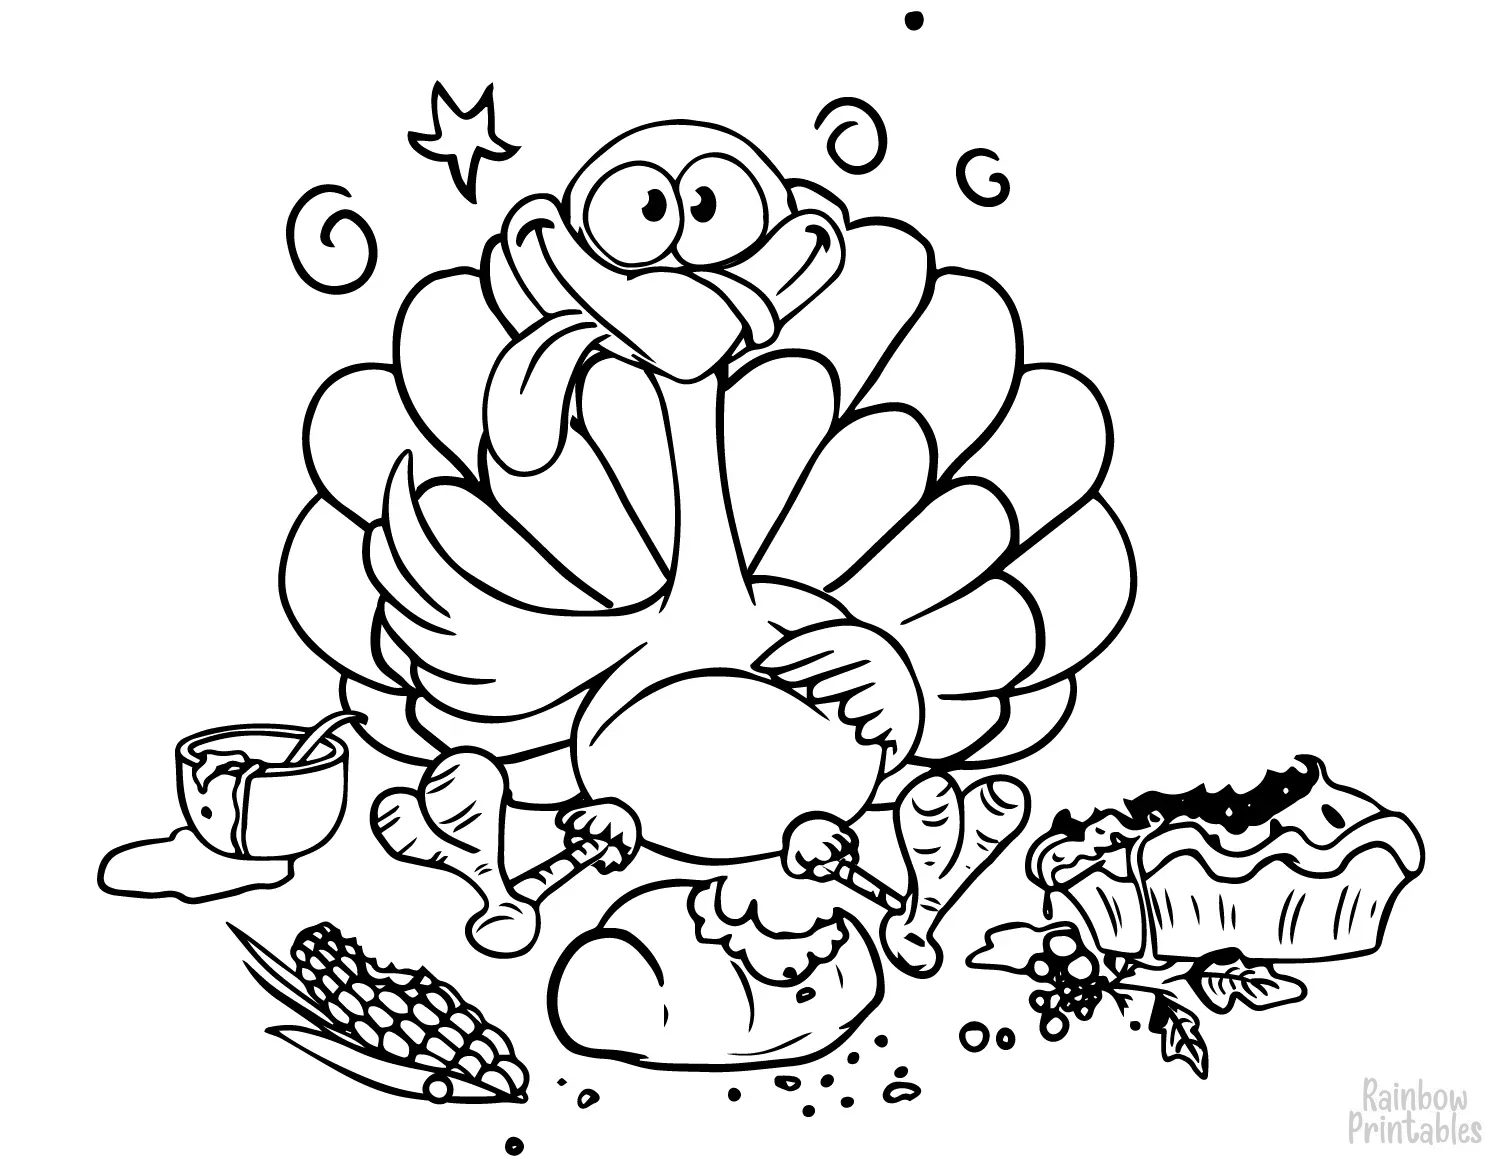 TURKEY FULL OF THANKSGIVING FOOD BUFFET CORN PIE STUFFED Clipart Coloring Pages for Kids Adults Art Activities Line Art